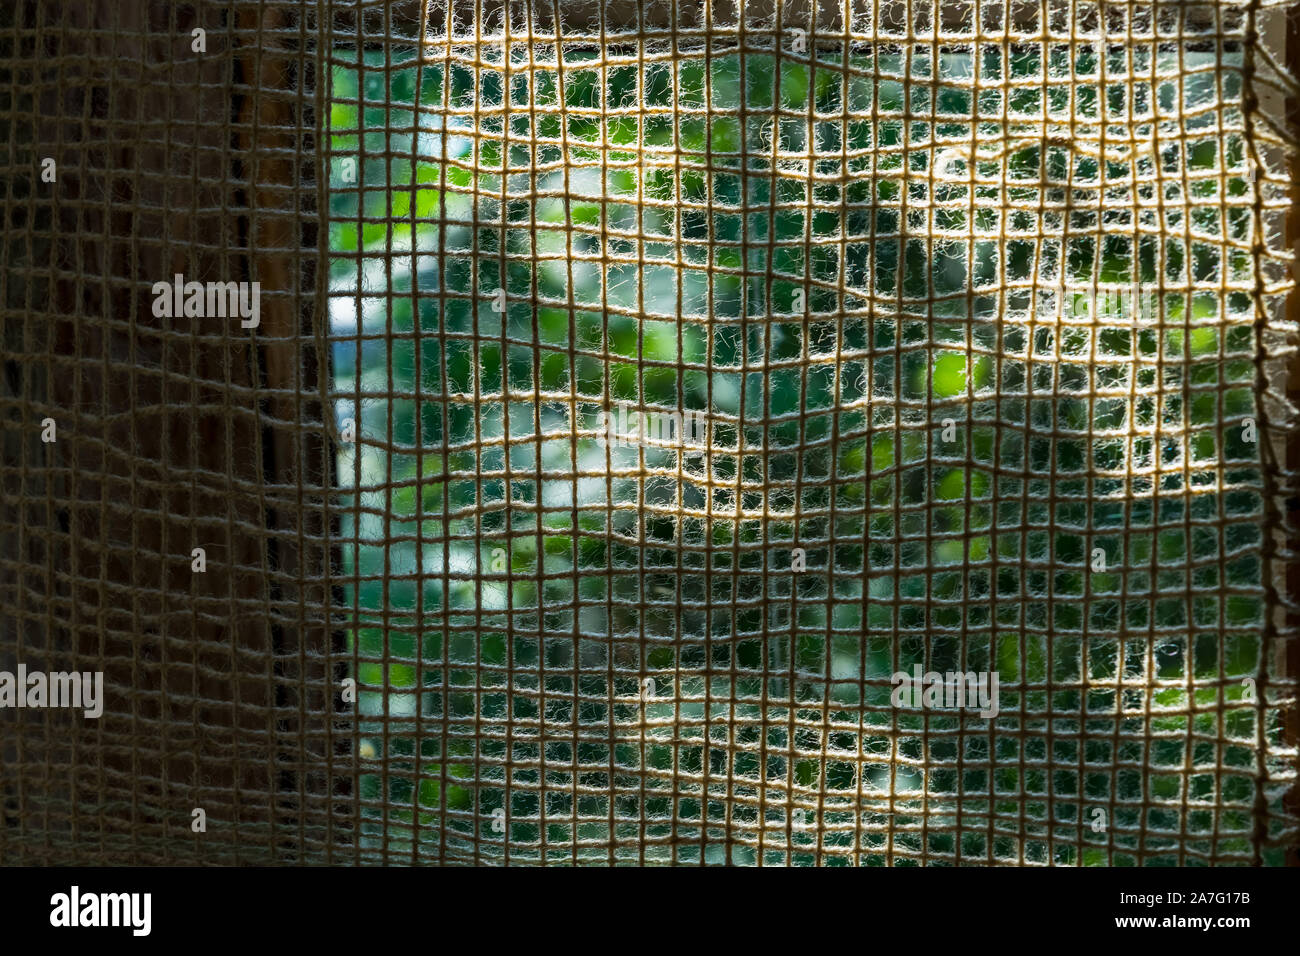 Rare fabric of cotton fluffy yarns attached to the wooden frame against sunlight. There is greenery behind the fabric net.Part of the grid is shadowed Stock Photo